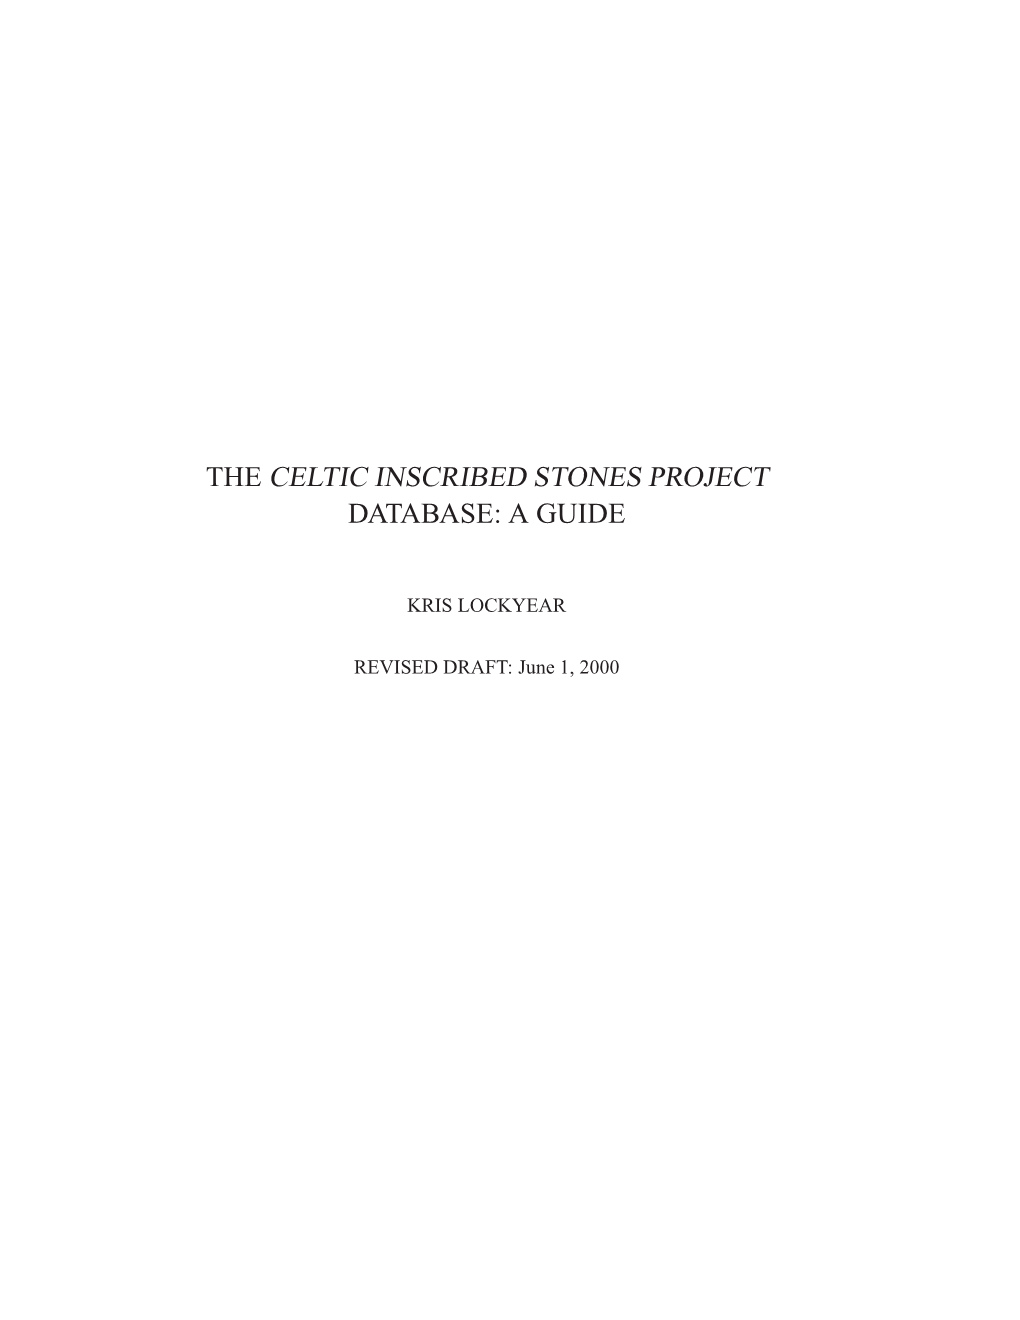 The Celtic Inscribed Stones Project Database: a Guide